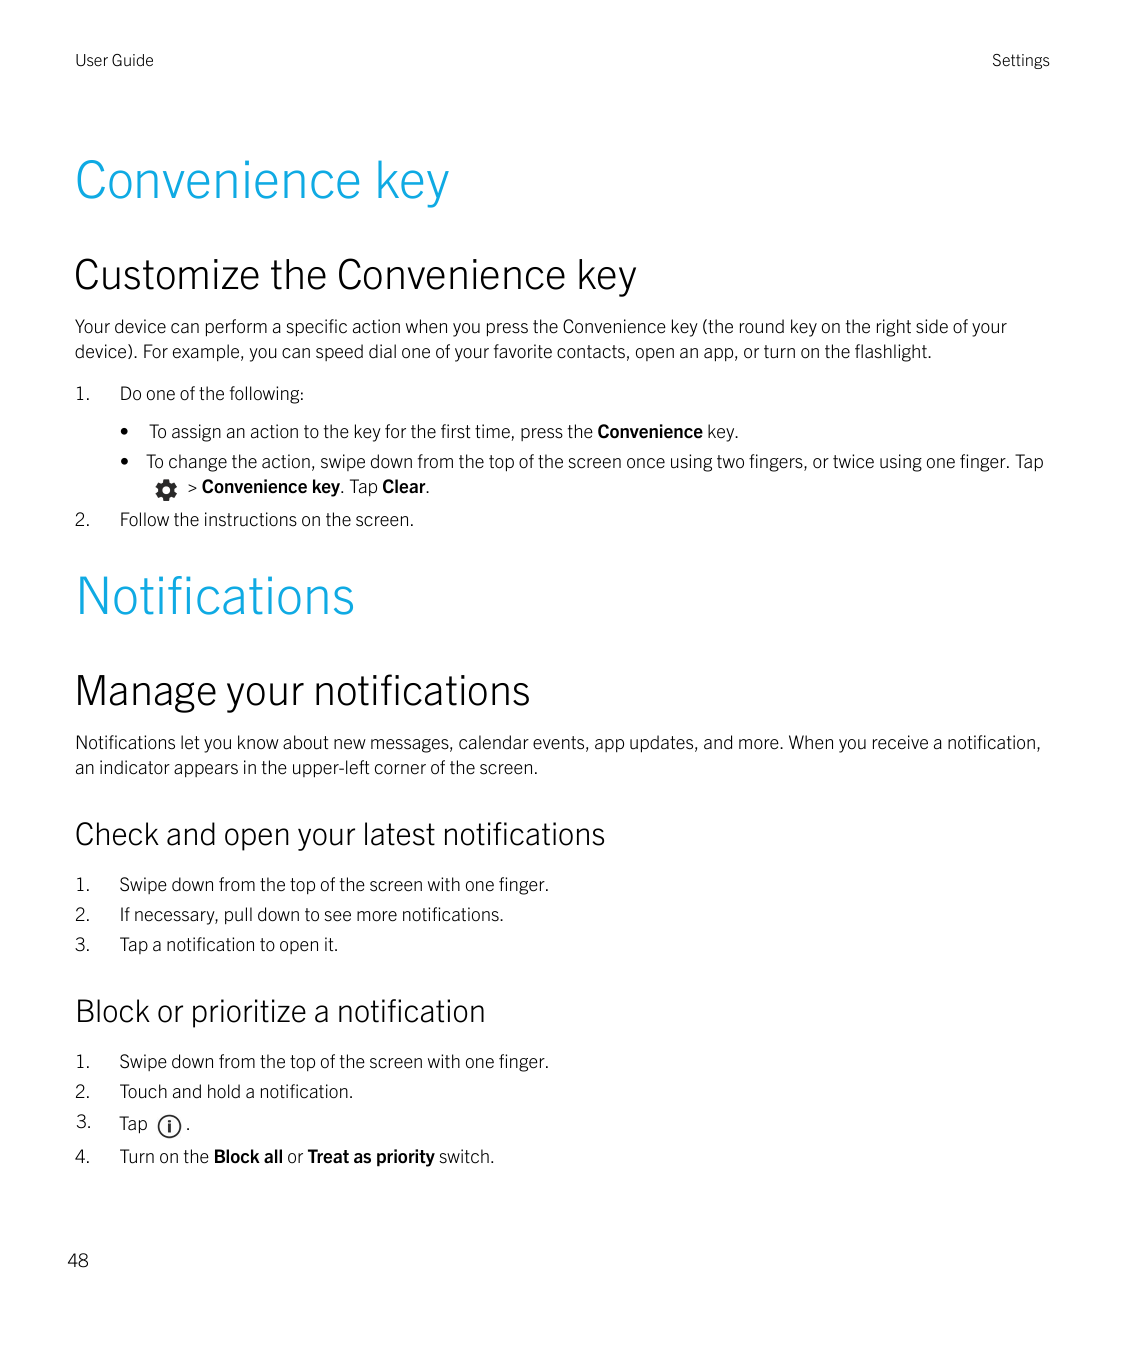 User GuideSettingsConvenience keyCustomize the Convenience keyYour device can perform a specific action when you press the Conve